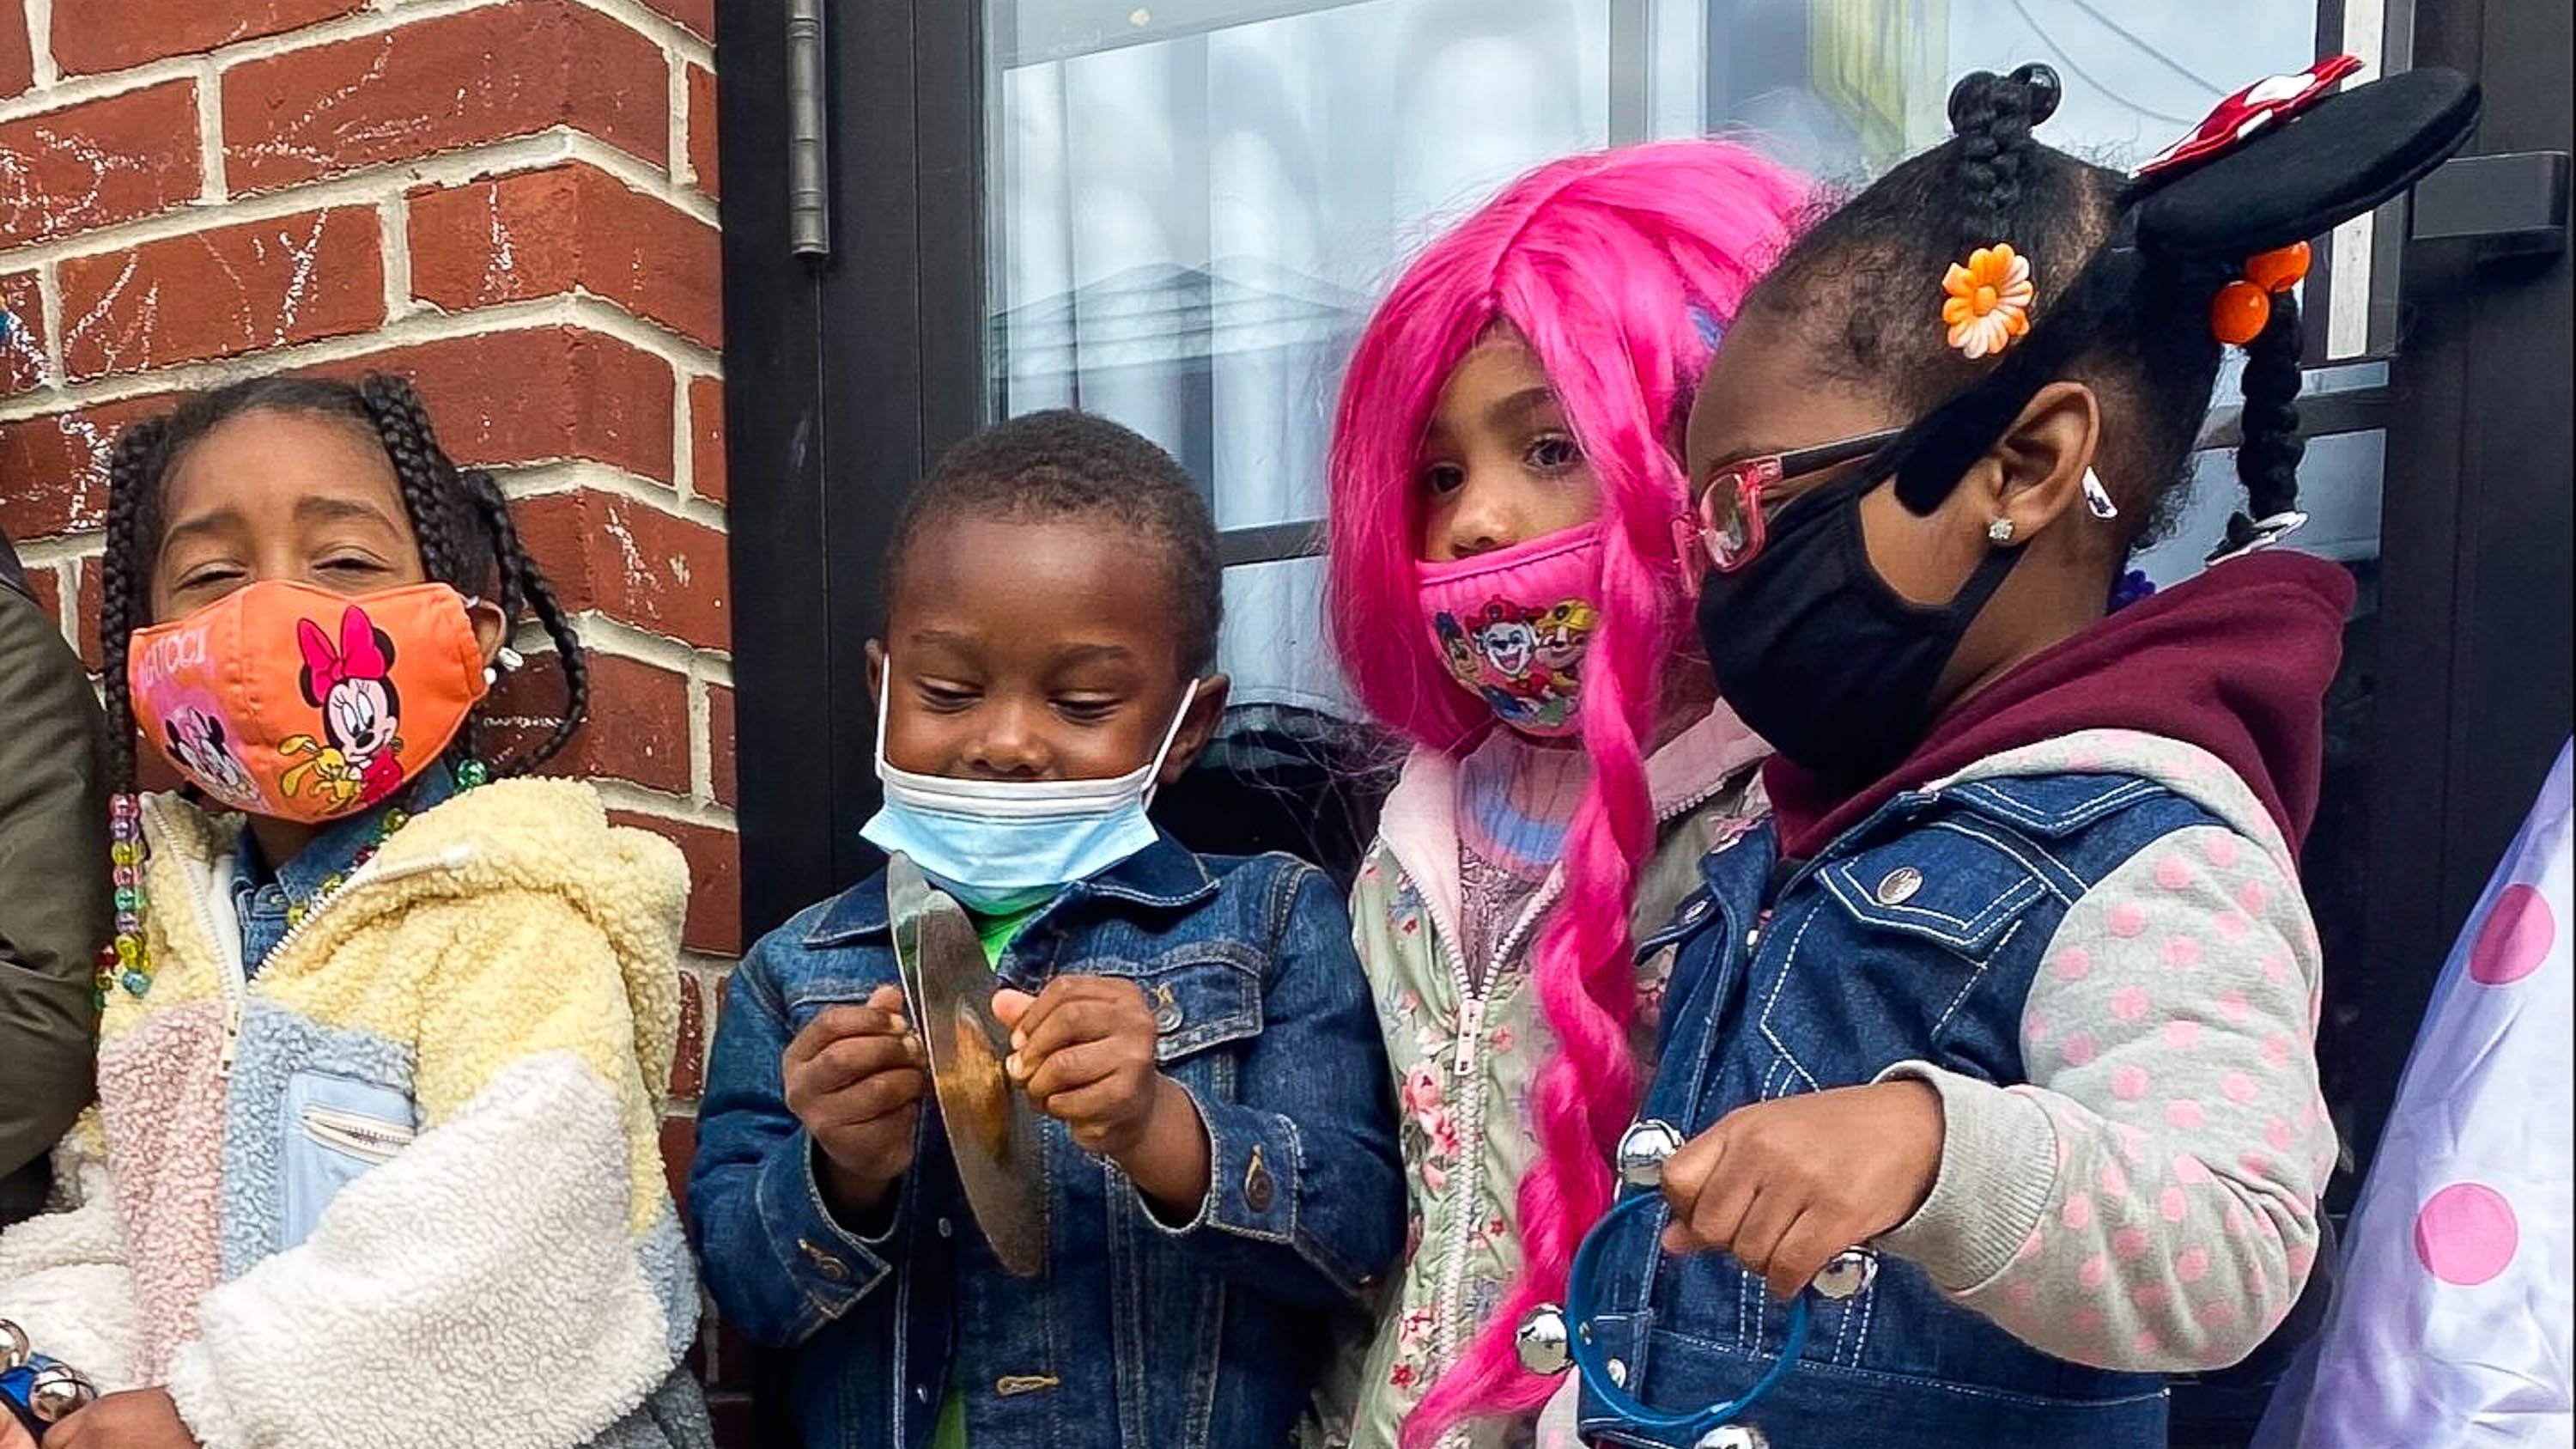 Four preschoolers, each wearing protective masks, stand side-by-side next to a brick wall and window.